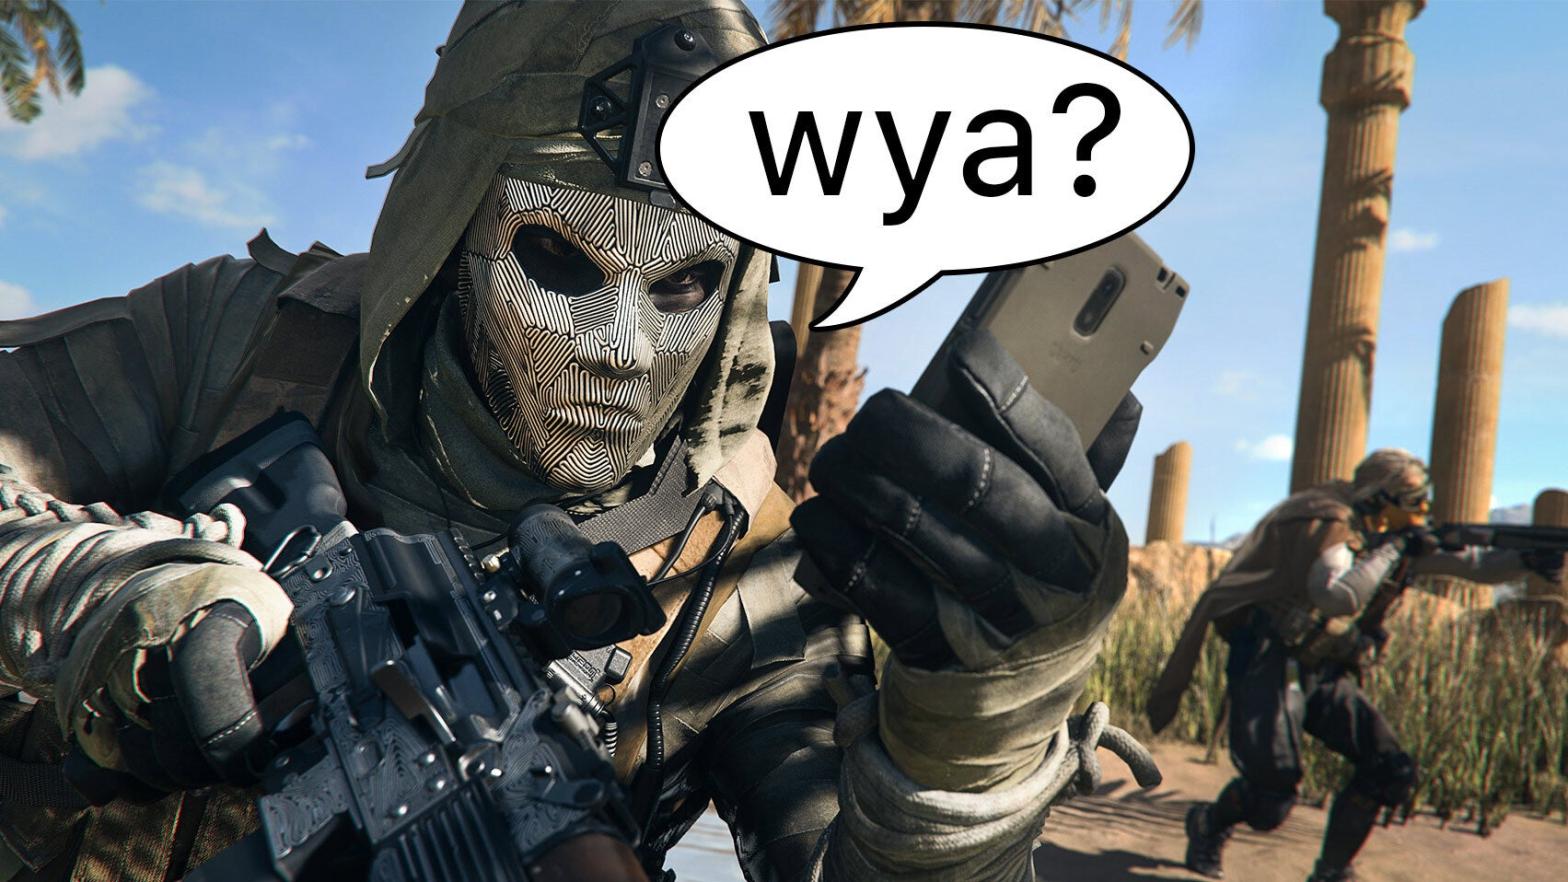 If you hear a heavy Long Island accent mocking you in Warzone 2.0, it's me. (Image: Activision / Kotaku)